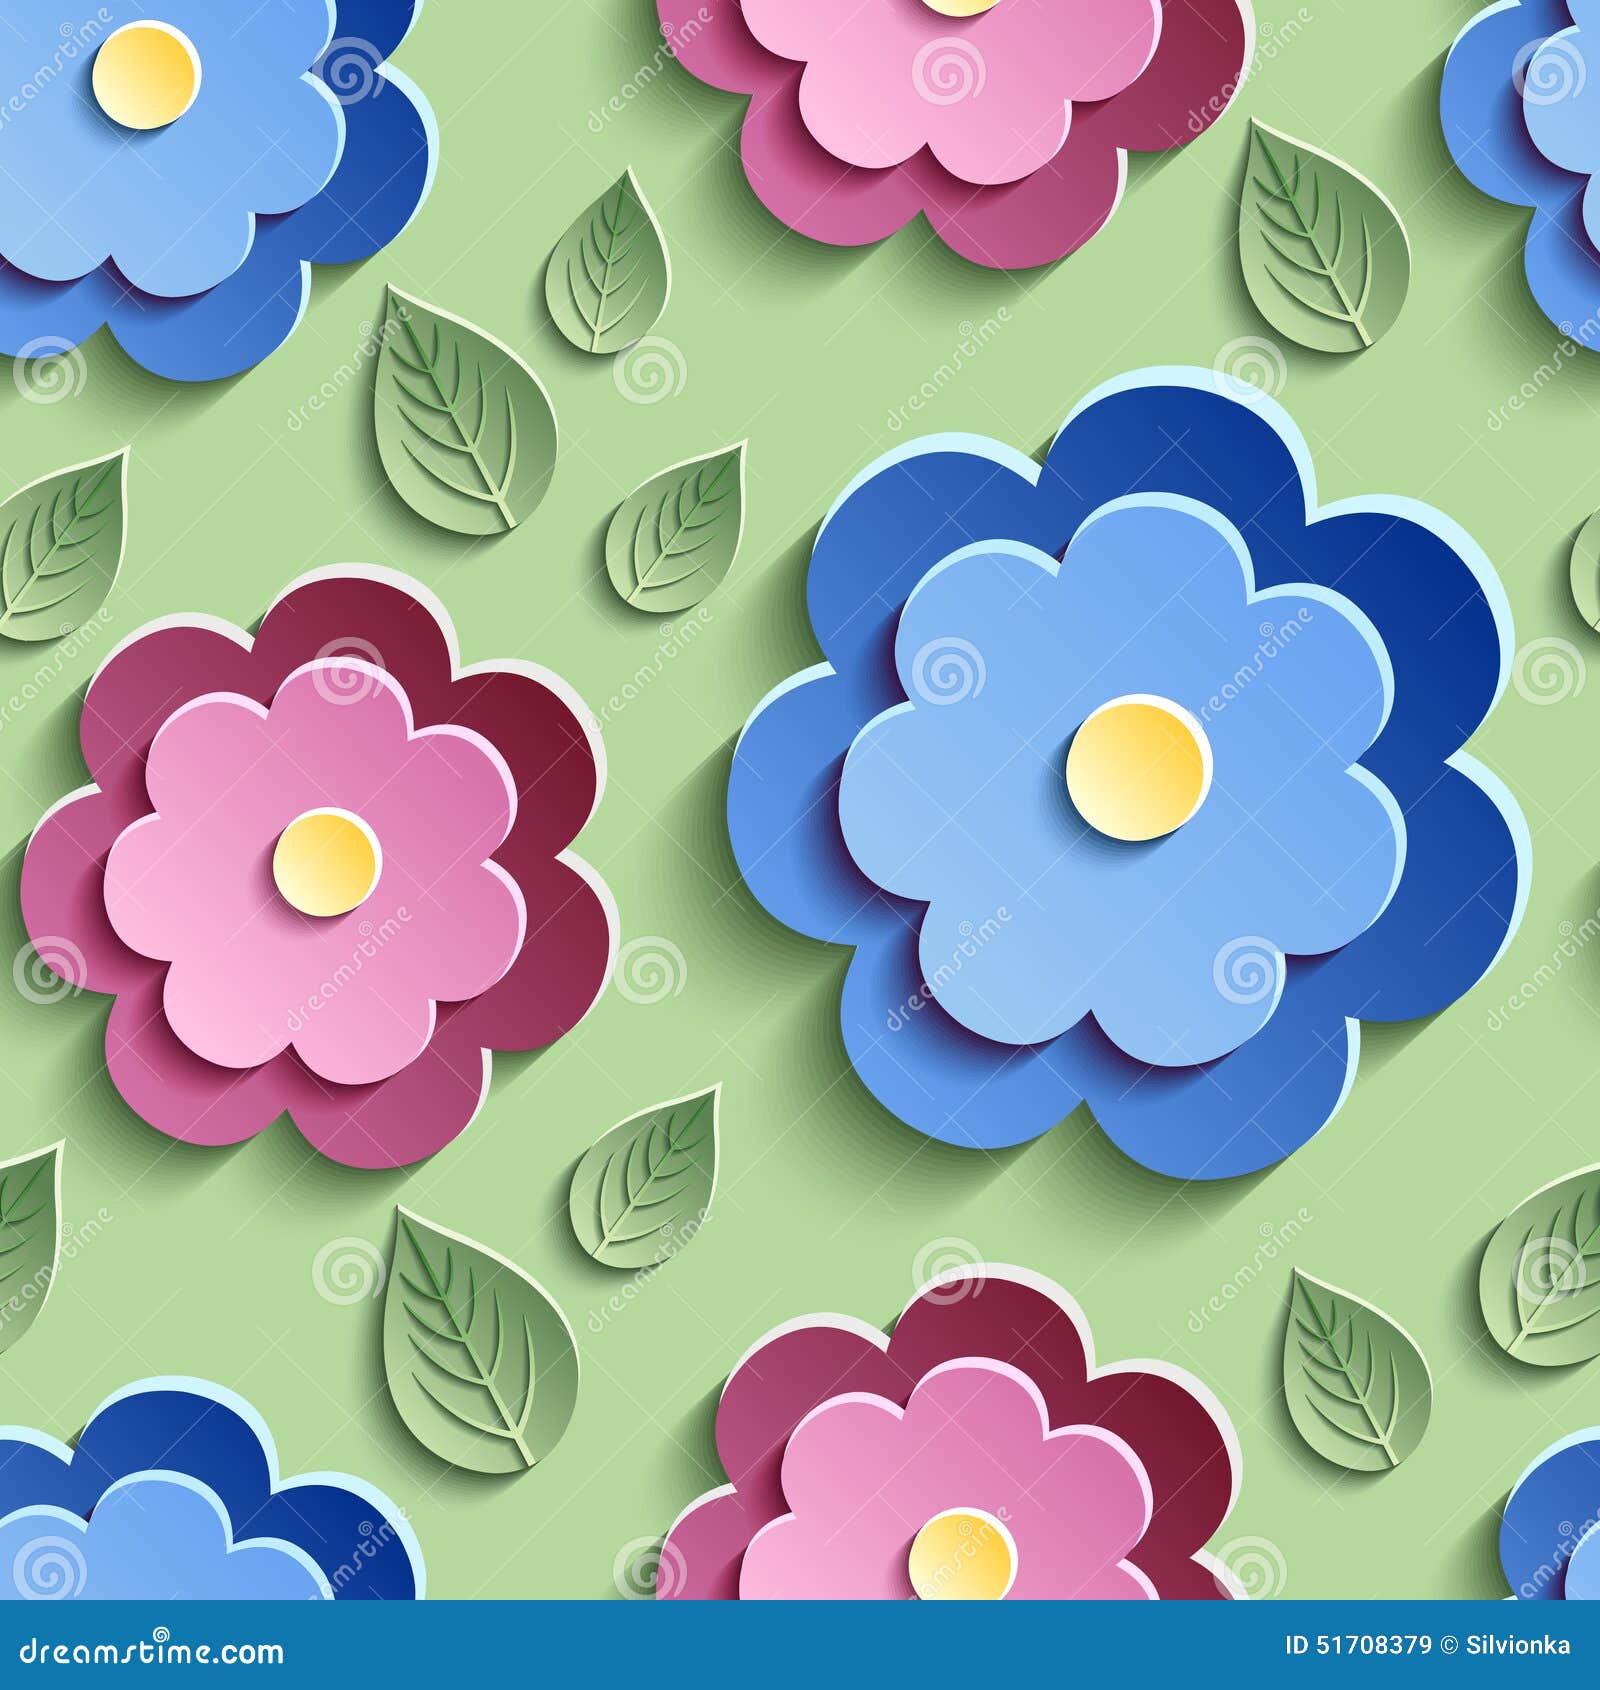 Floral Seamless Pattern With Colorful 18D Flowers Illustration ...